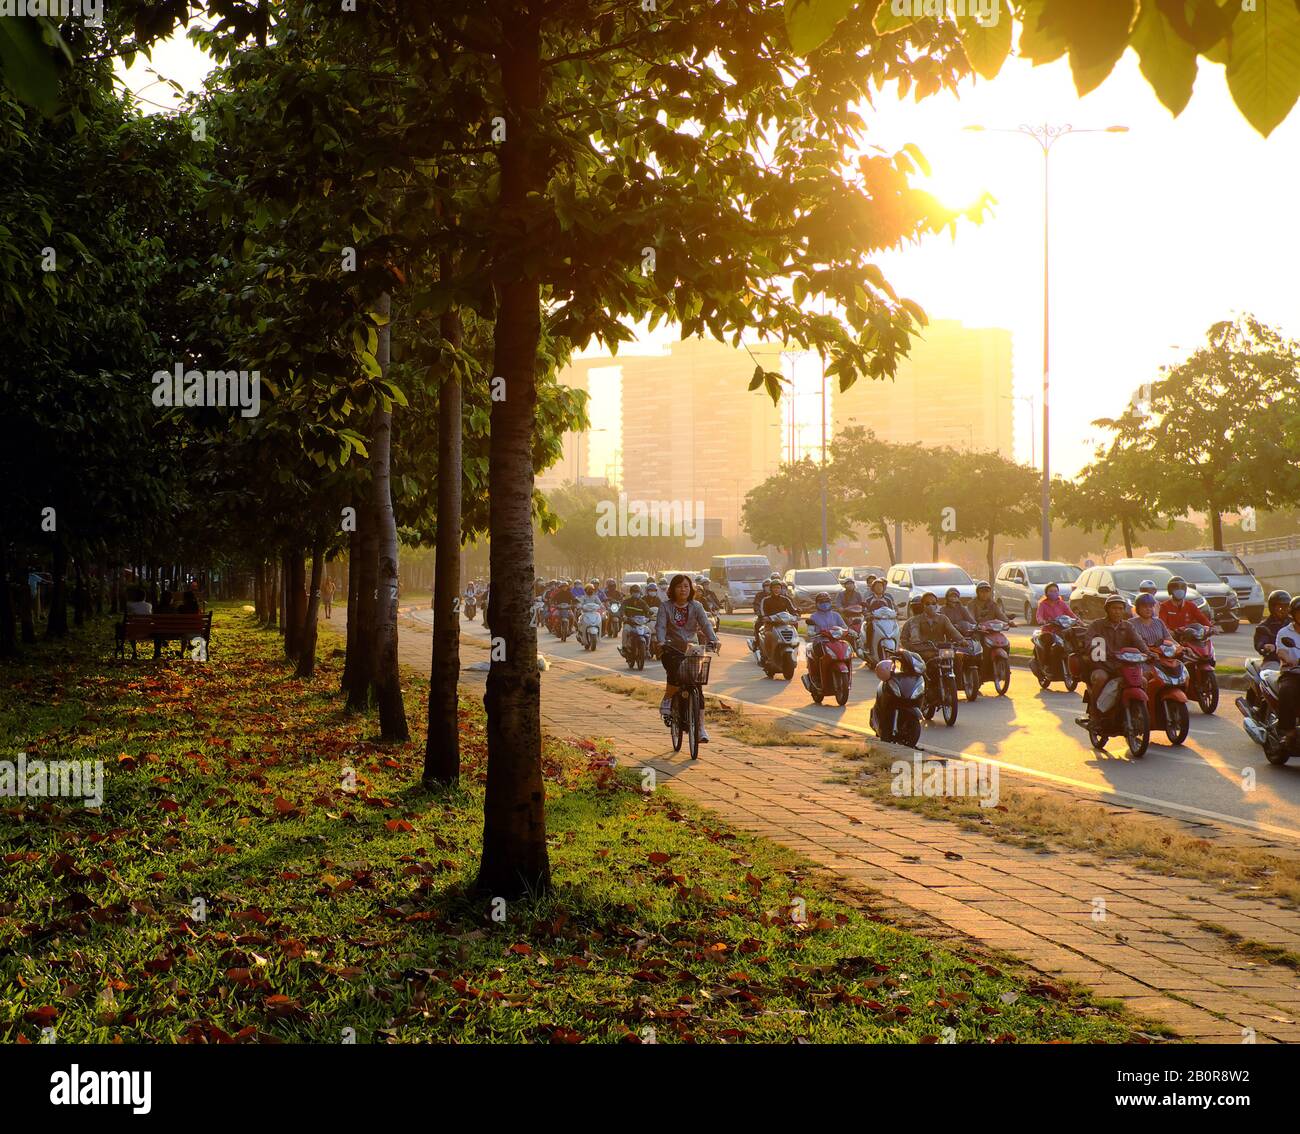 HO CHI MINH CITY, VIET NAM, Wonderful scene at early morning in park, with leaves from tree fall on grass field, people moving on street in  sunlight Stock Photo